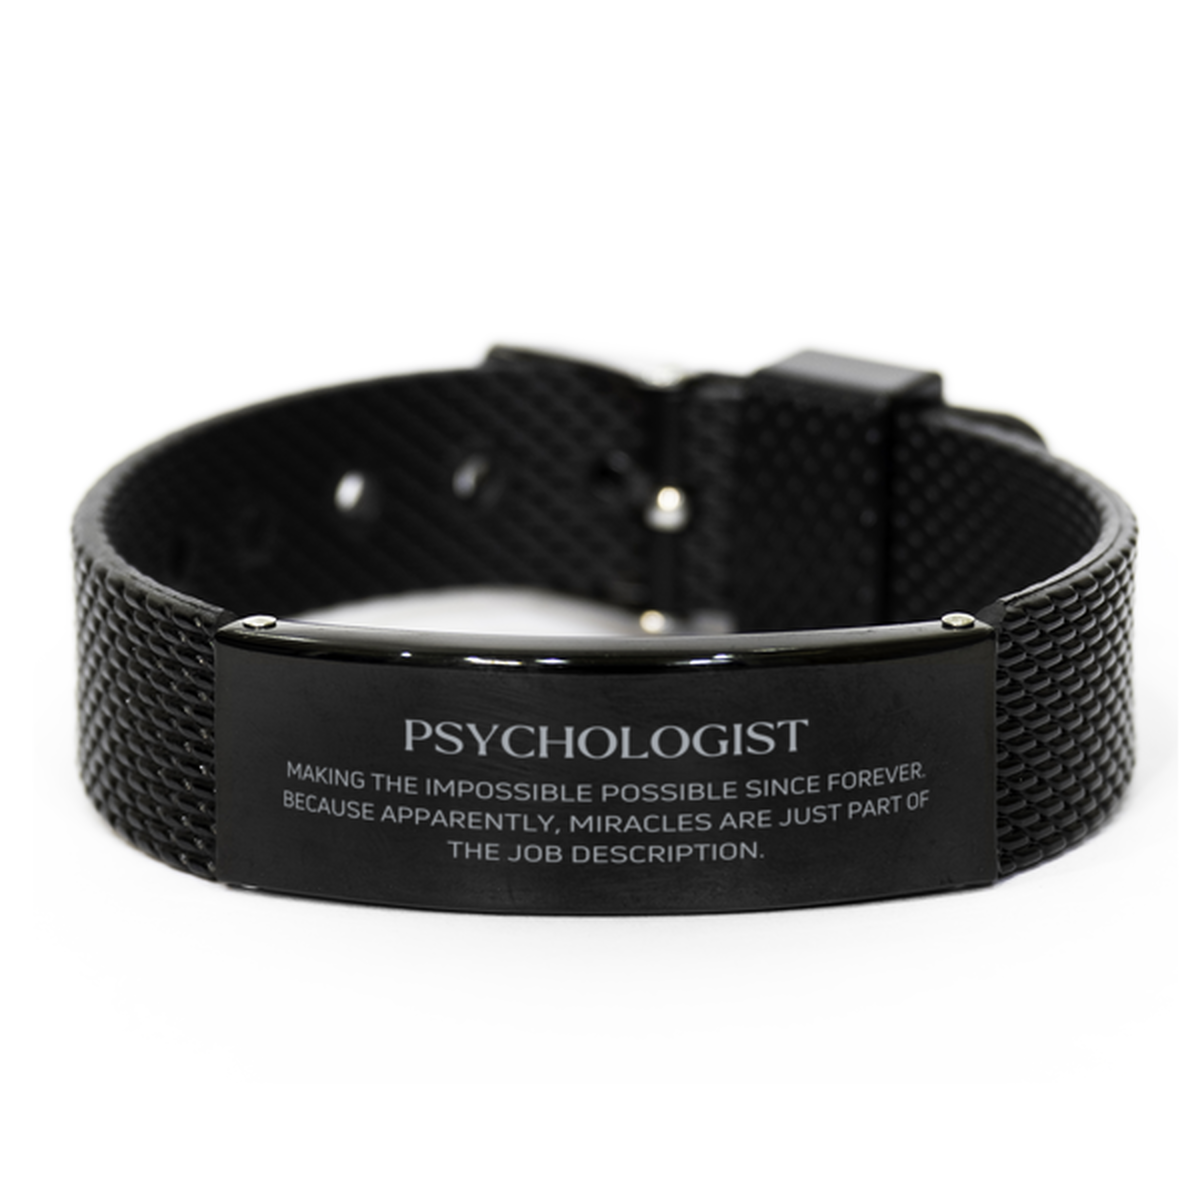 Funny Psychologist Gifts, Miracles are just part of the job description, Inspirational Birthday Black Shark Mesh Bracelet For Psychologist, Men, Women, Coworkers, Friends, Boss